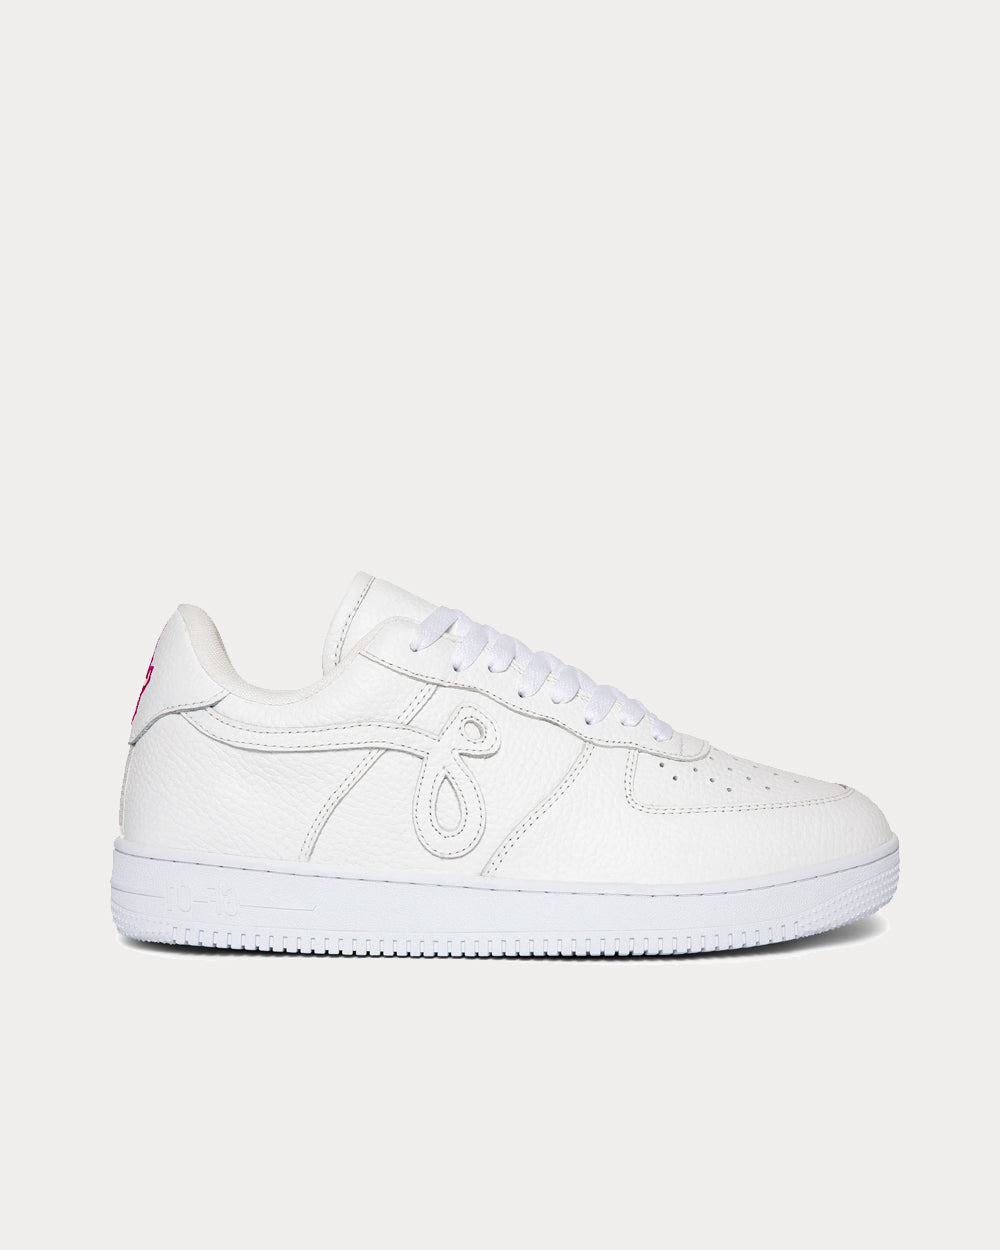 John Geiger - GF-01 White Pebbled Leather / Pink Embroidery Low Top Sneakers